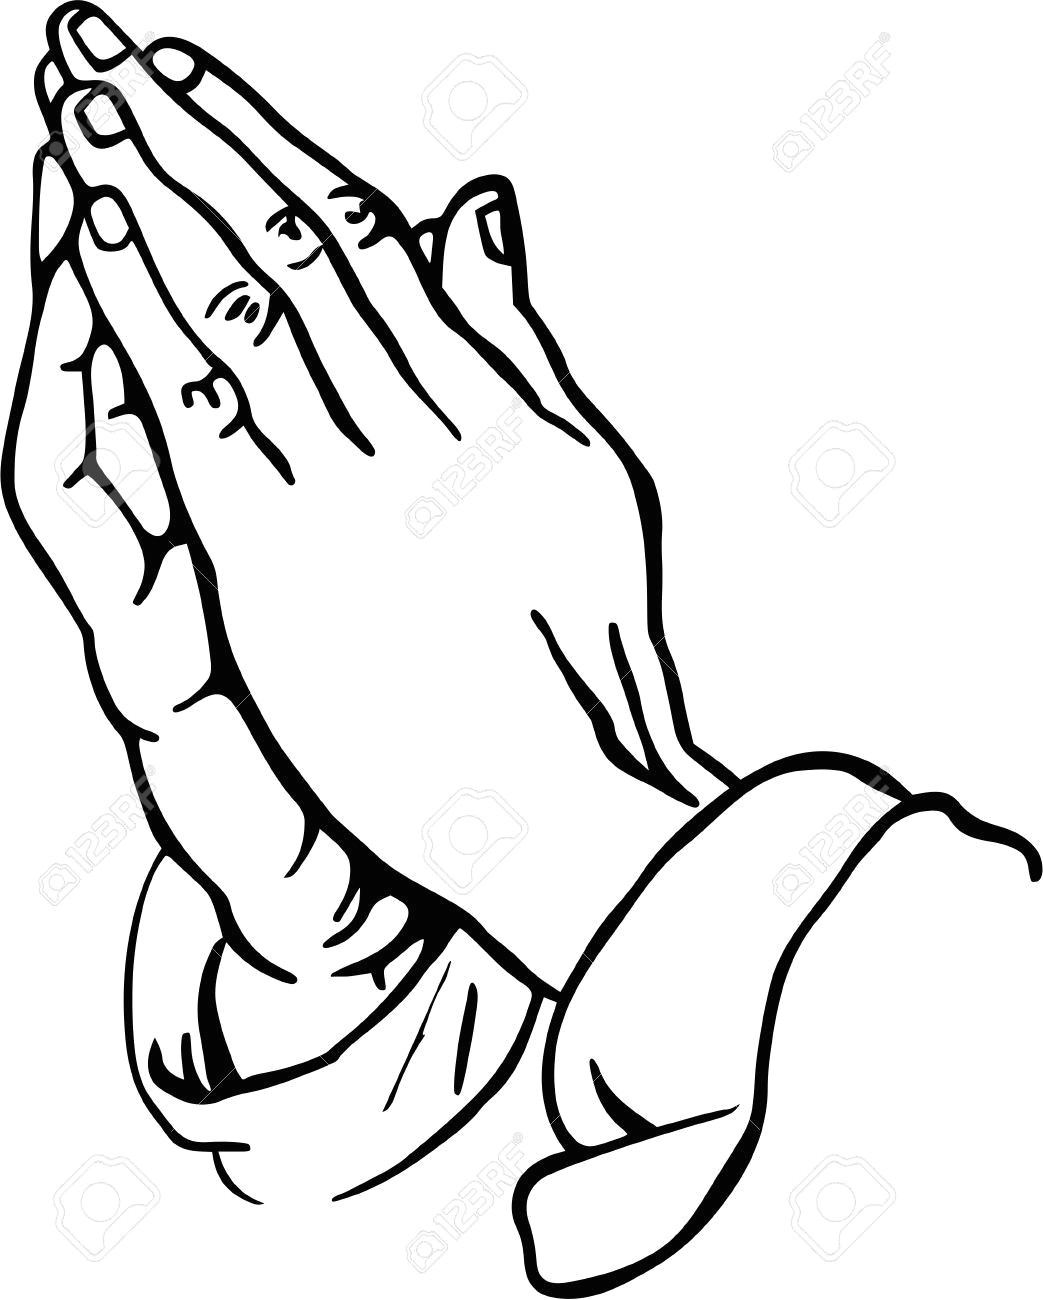 Drawings Of Helping Hands Praying Hands Clipart Stock Photo Picture and Royalty Free Image